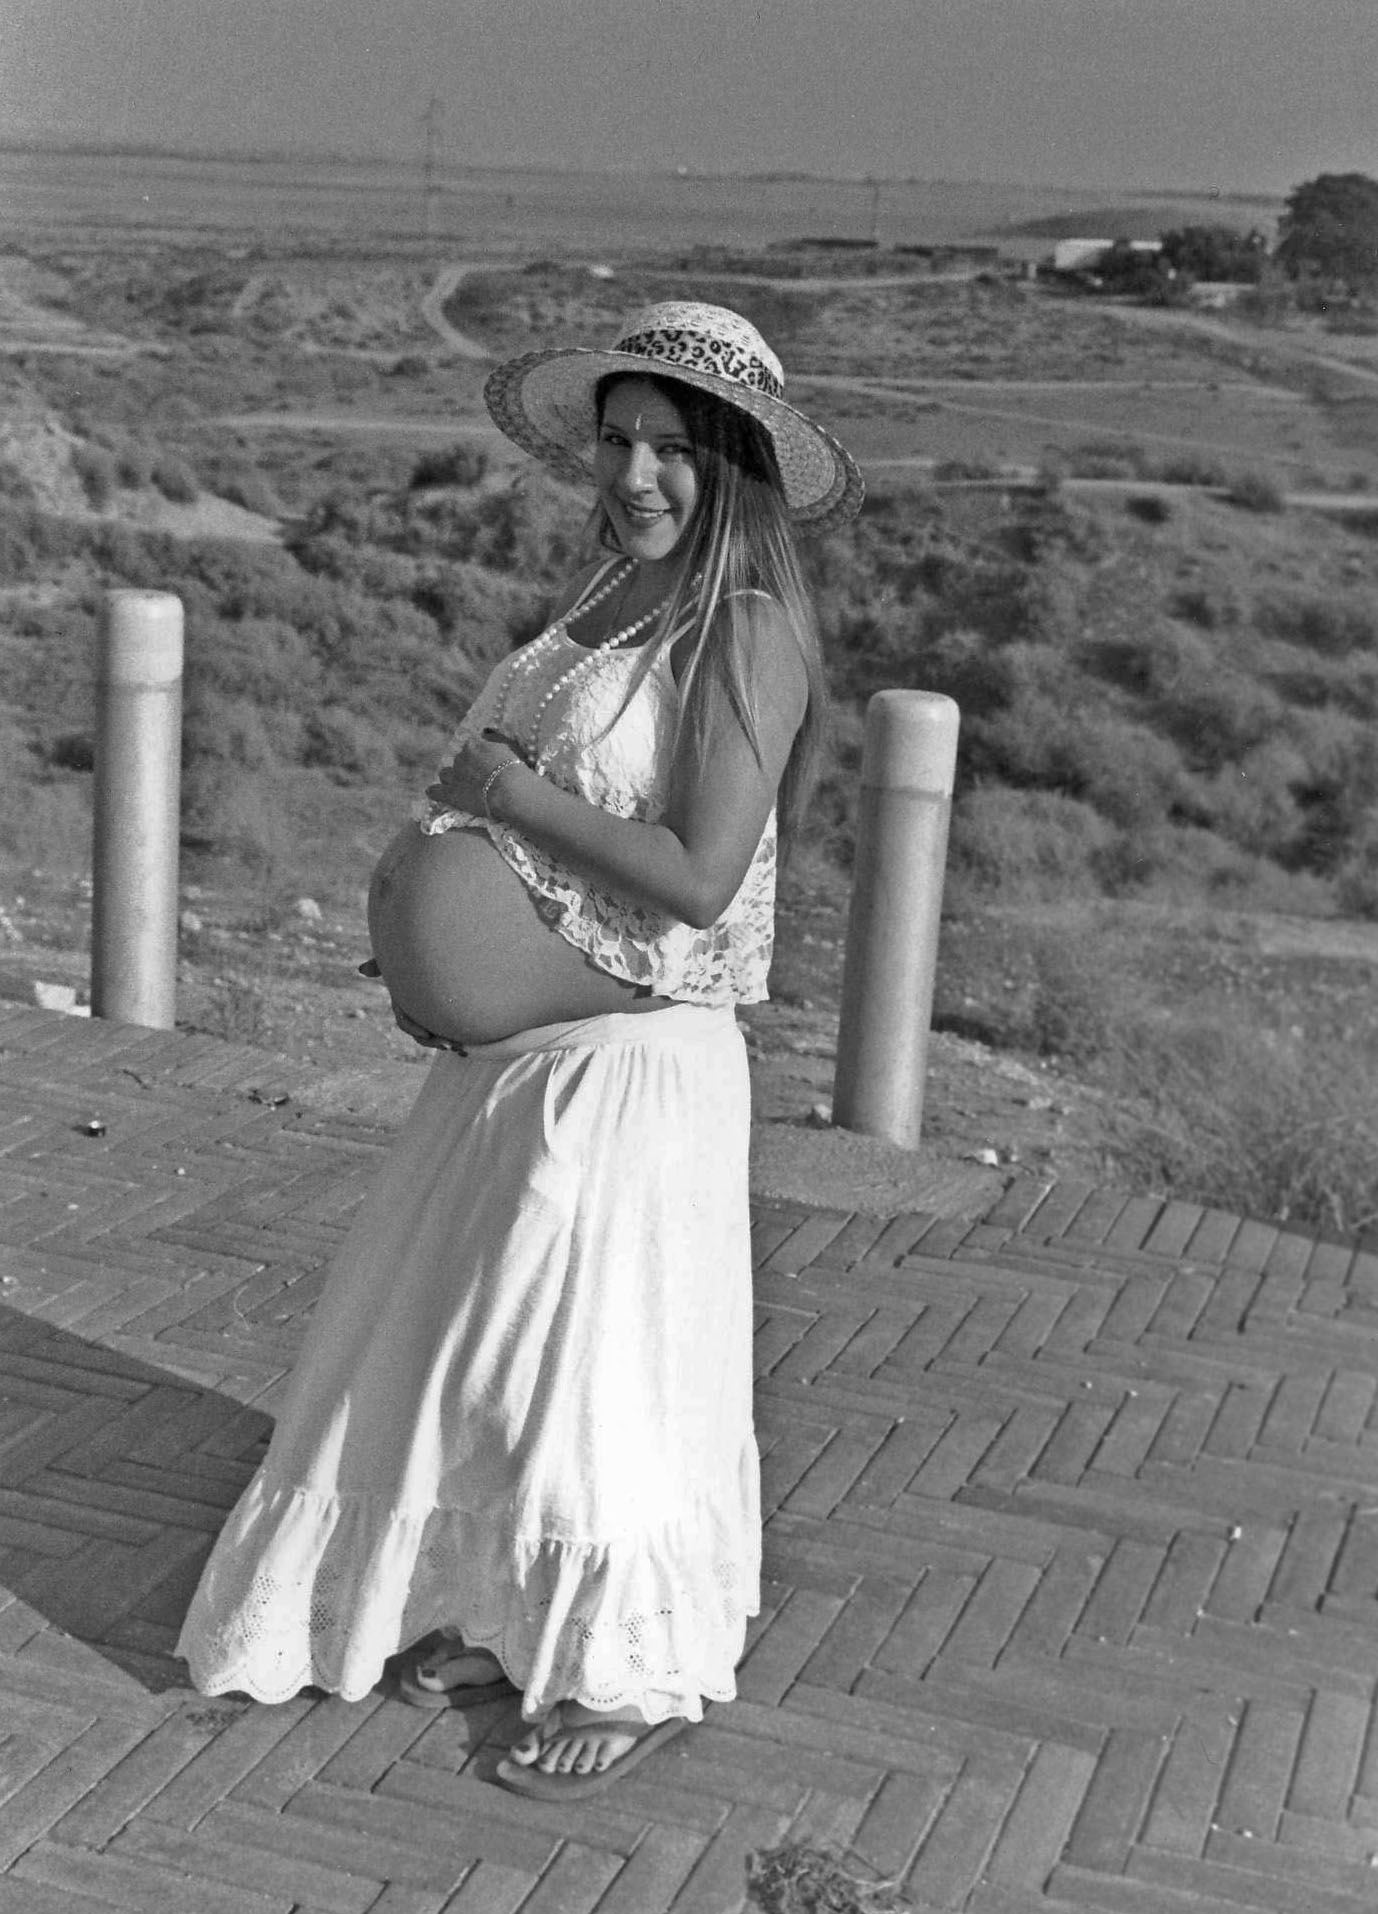 Paul Margolis took this photo in the Negev; the pregnant woman was modeling for another professional photographer at the time.